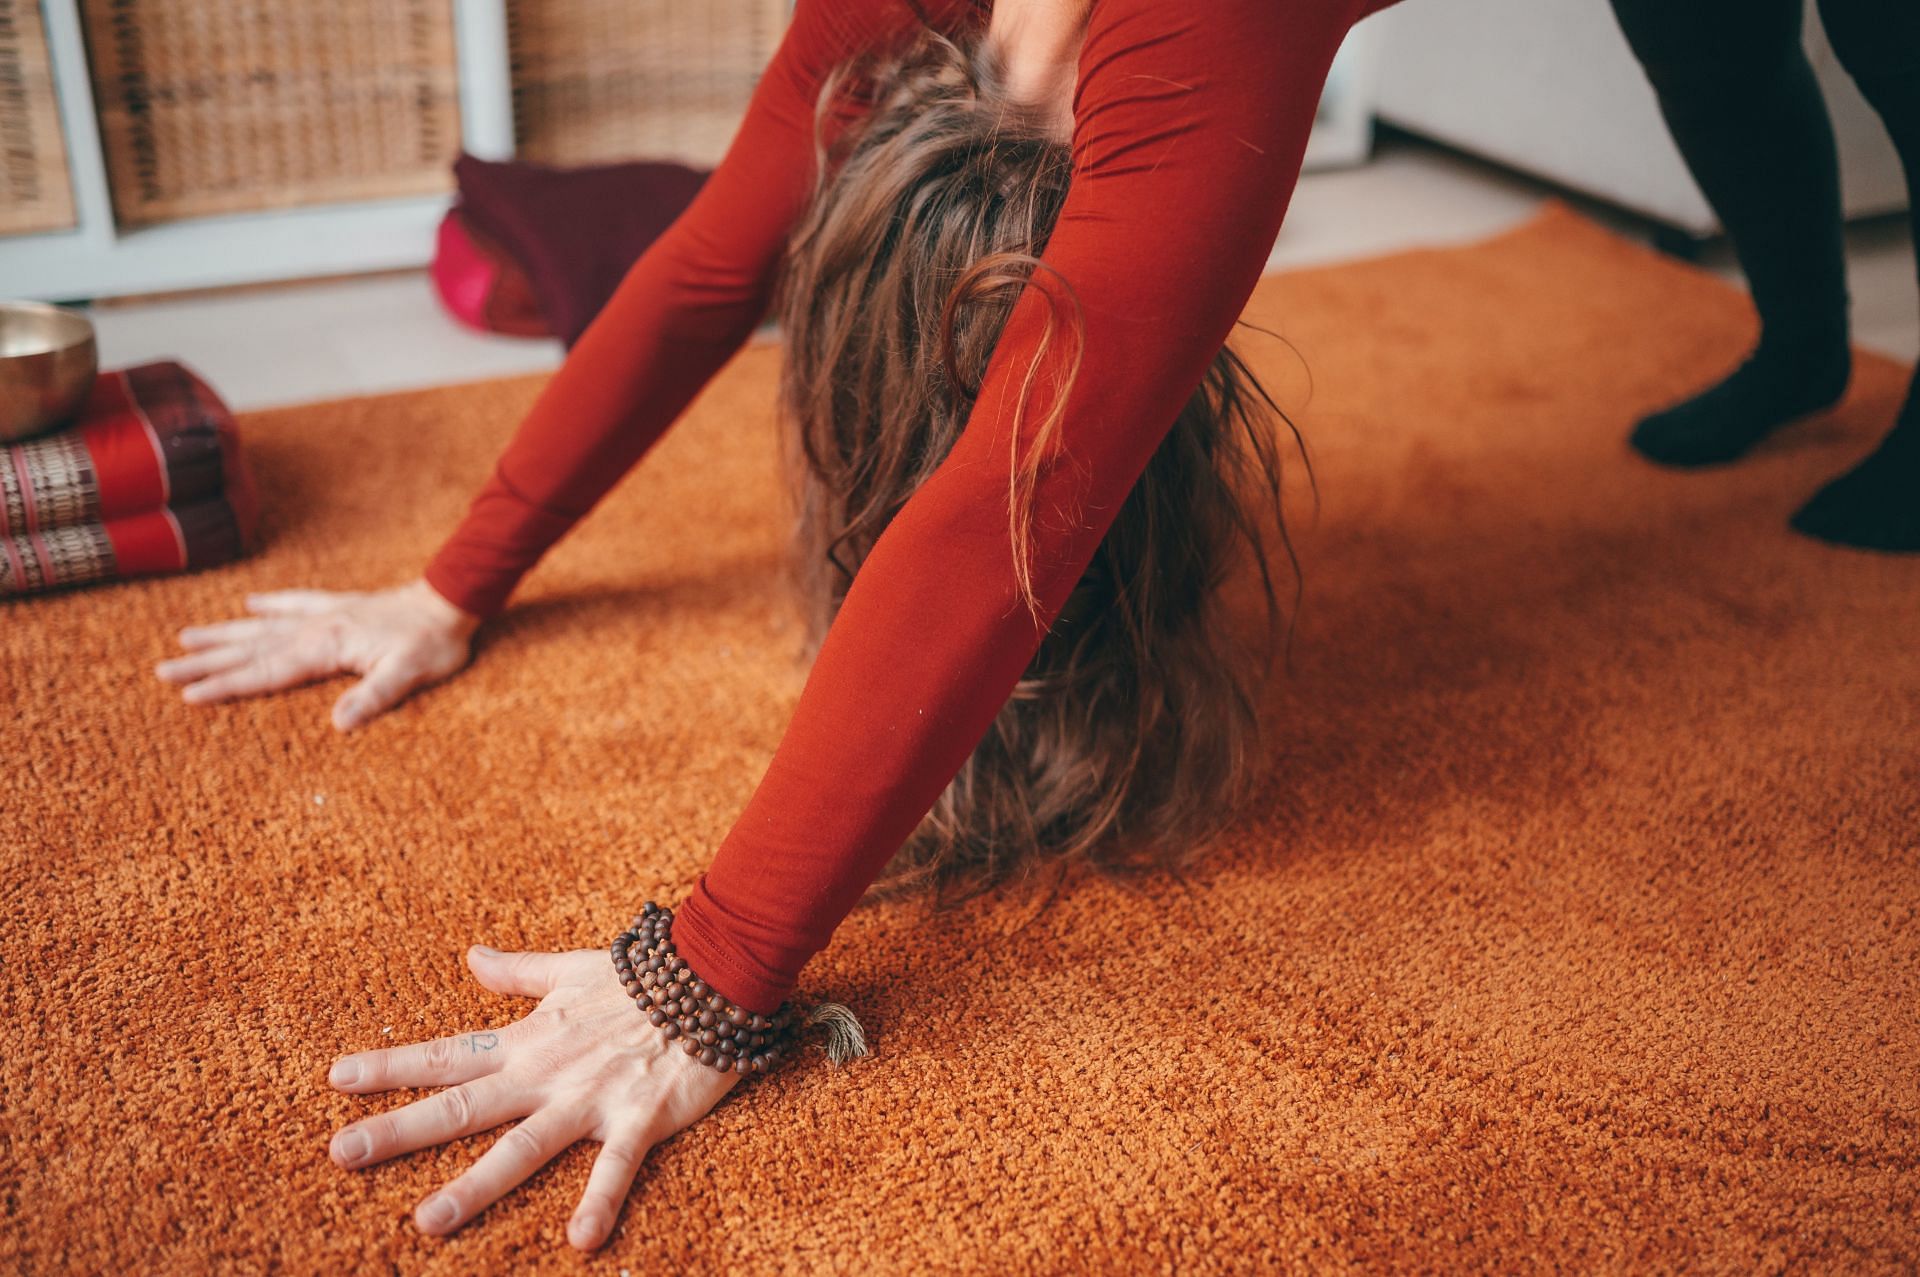 Just starting out with yoga? Try these six effective yoga with adrienne poses at home. (Image via Unsplash /Conscious Design)